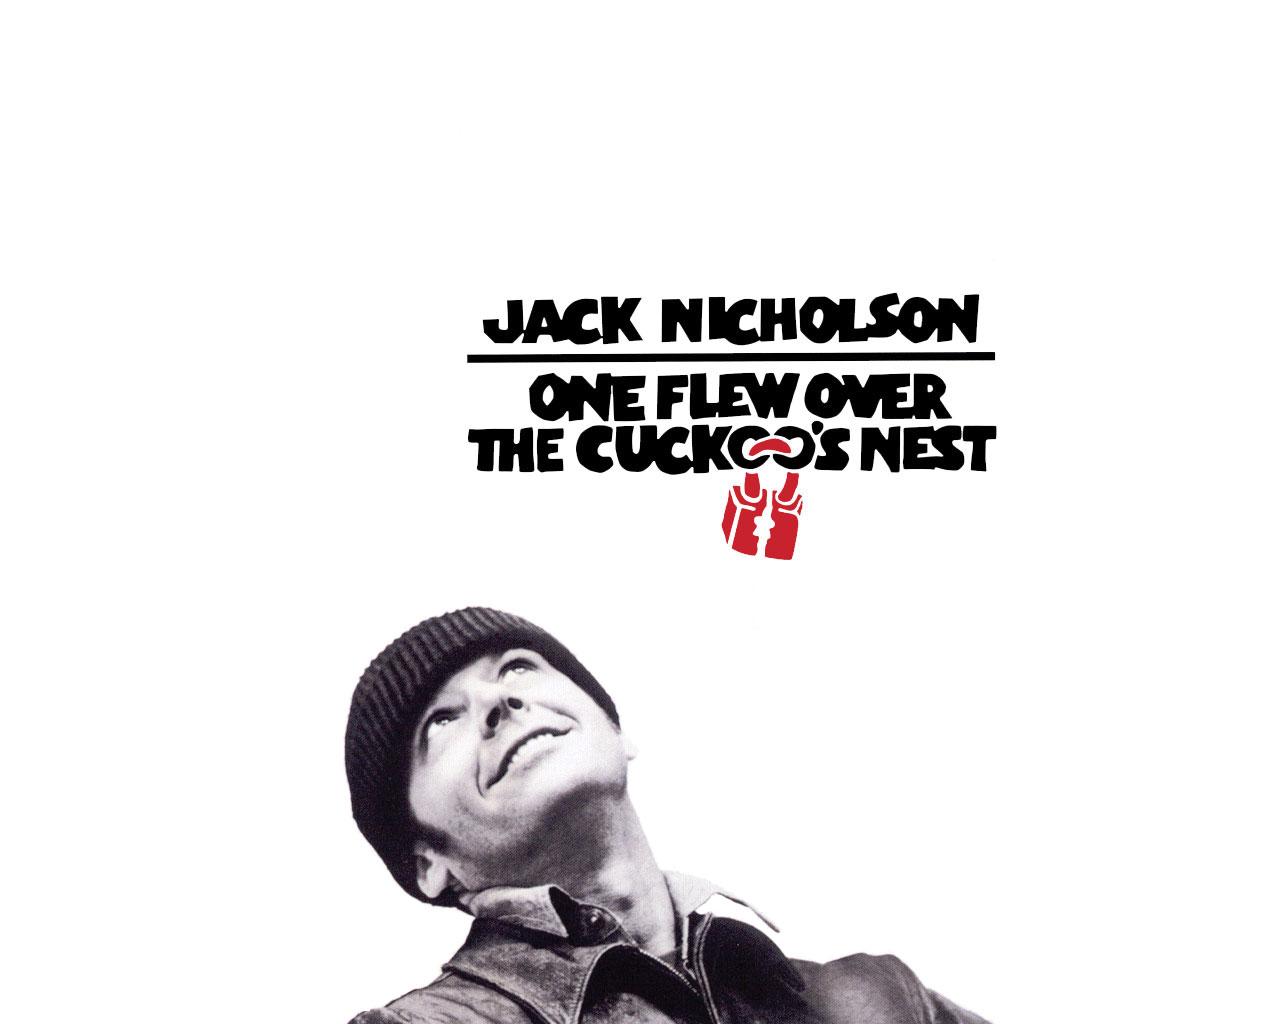 One Flew Over The Cuckoo's Nest Wallpaper #1 1280 x 1024 